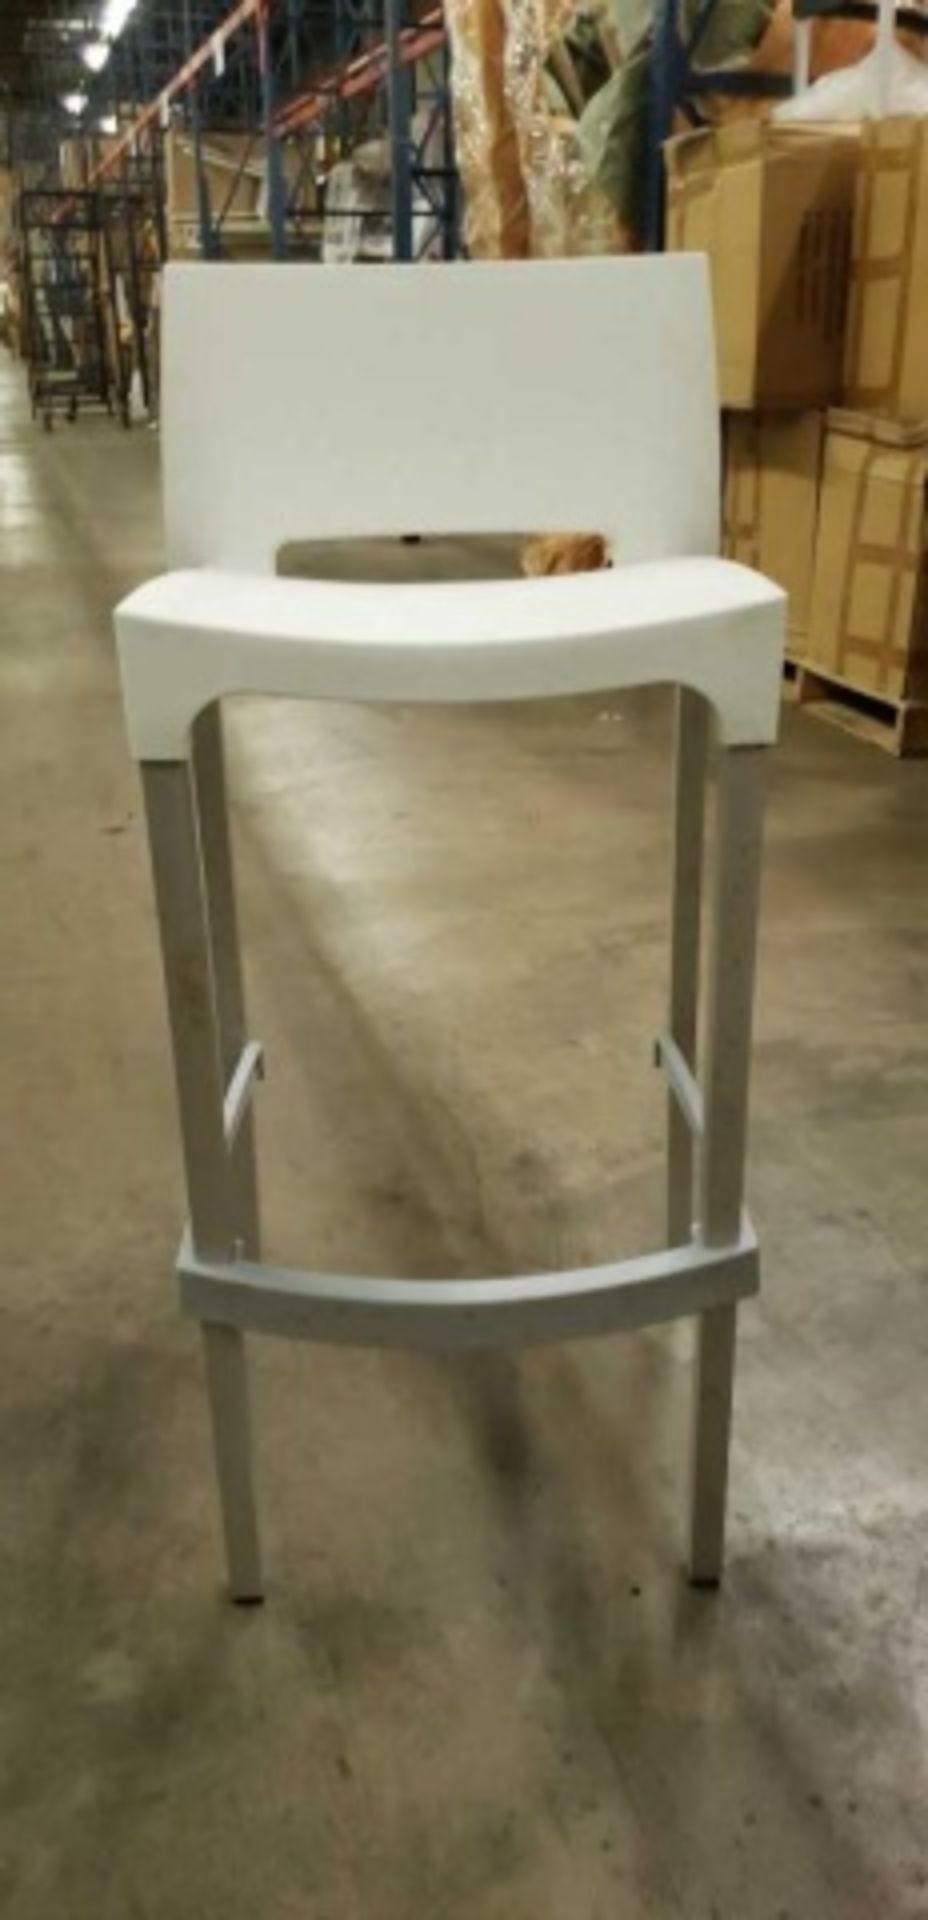 Domenica Barstool With Back - White. Square Tubular anodized matte aluminum legs, Resin seat and